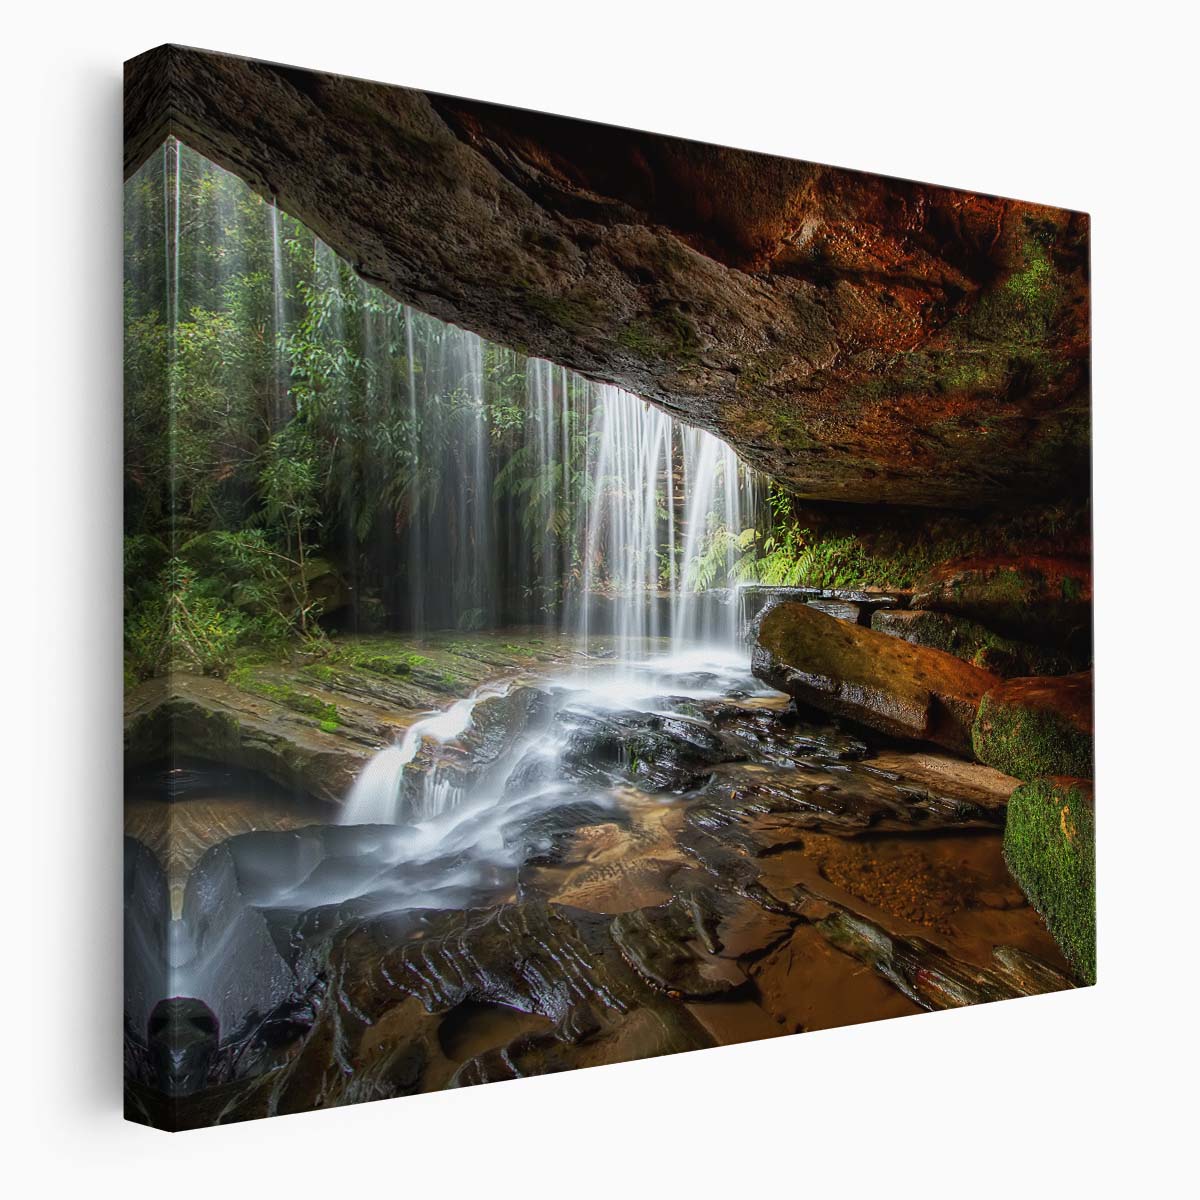 Somesby Falls Cave & Moss Landscape Wall Art by Luxuriance Designs. Made in USA.